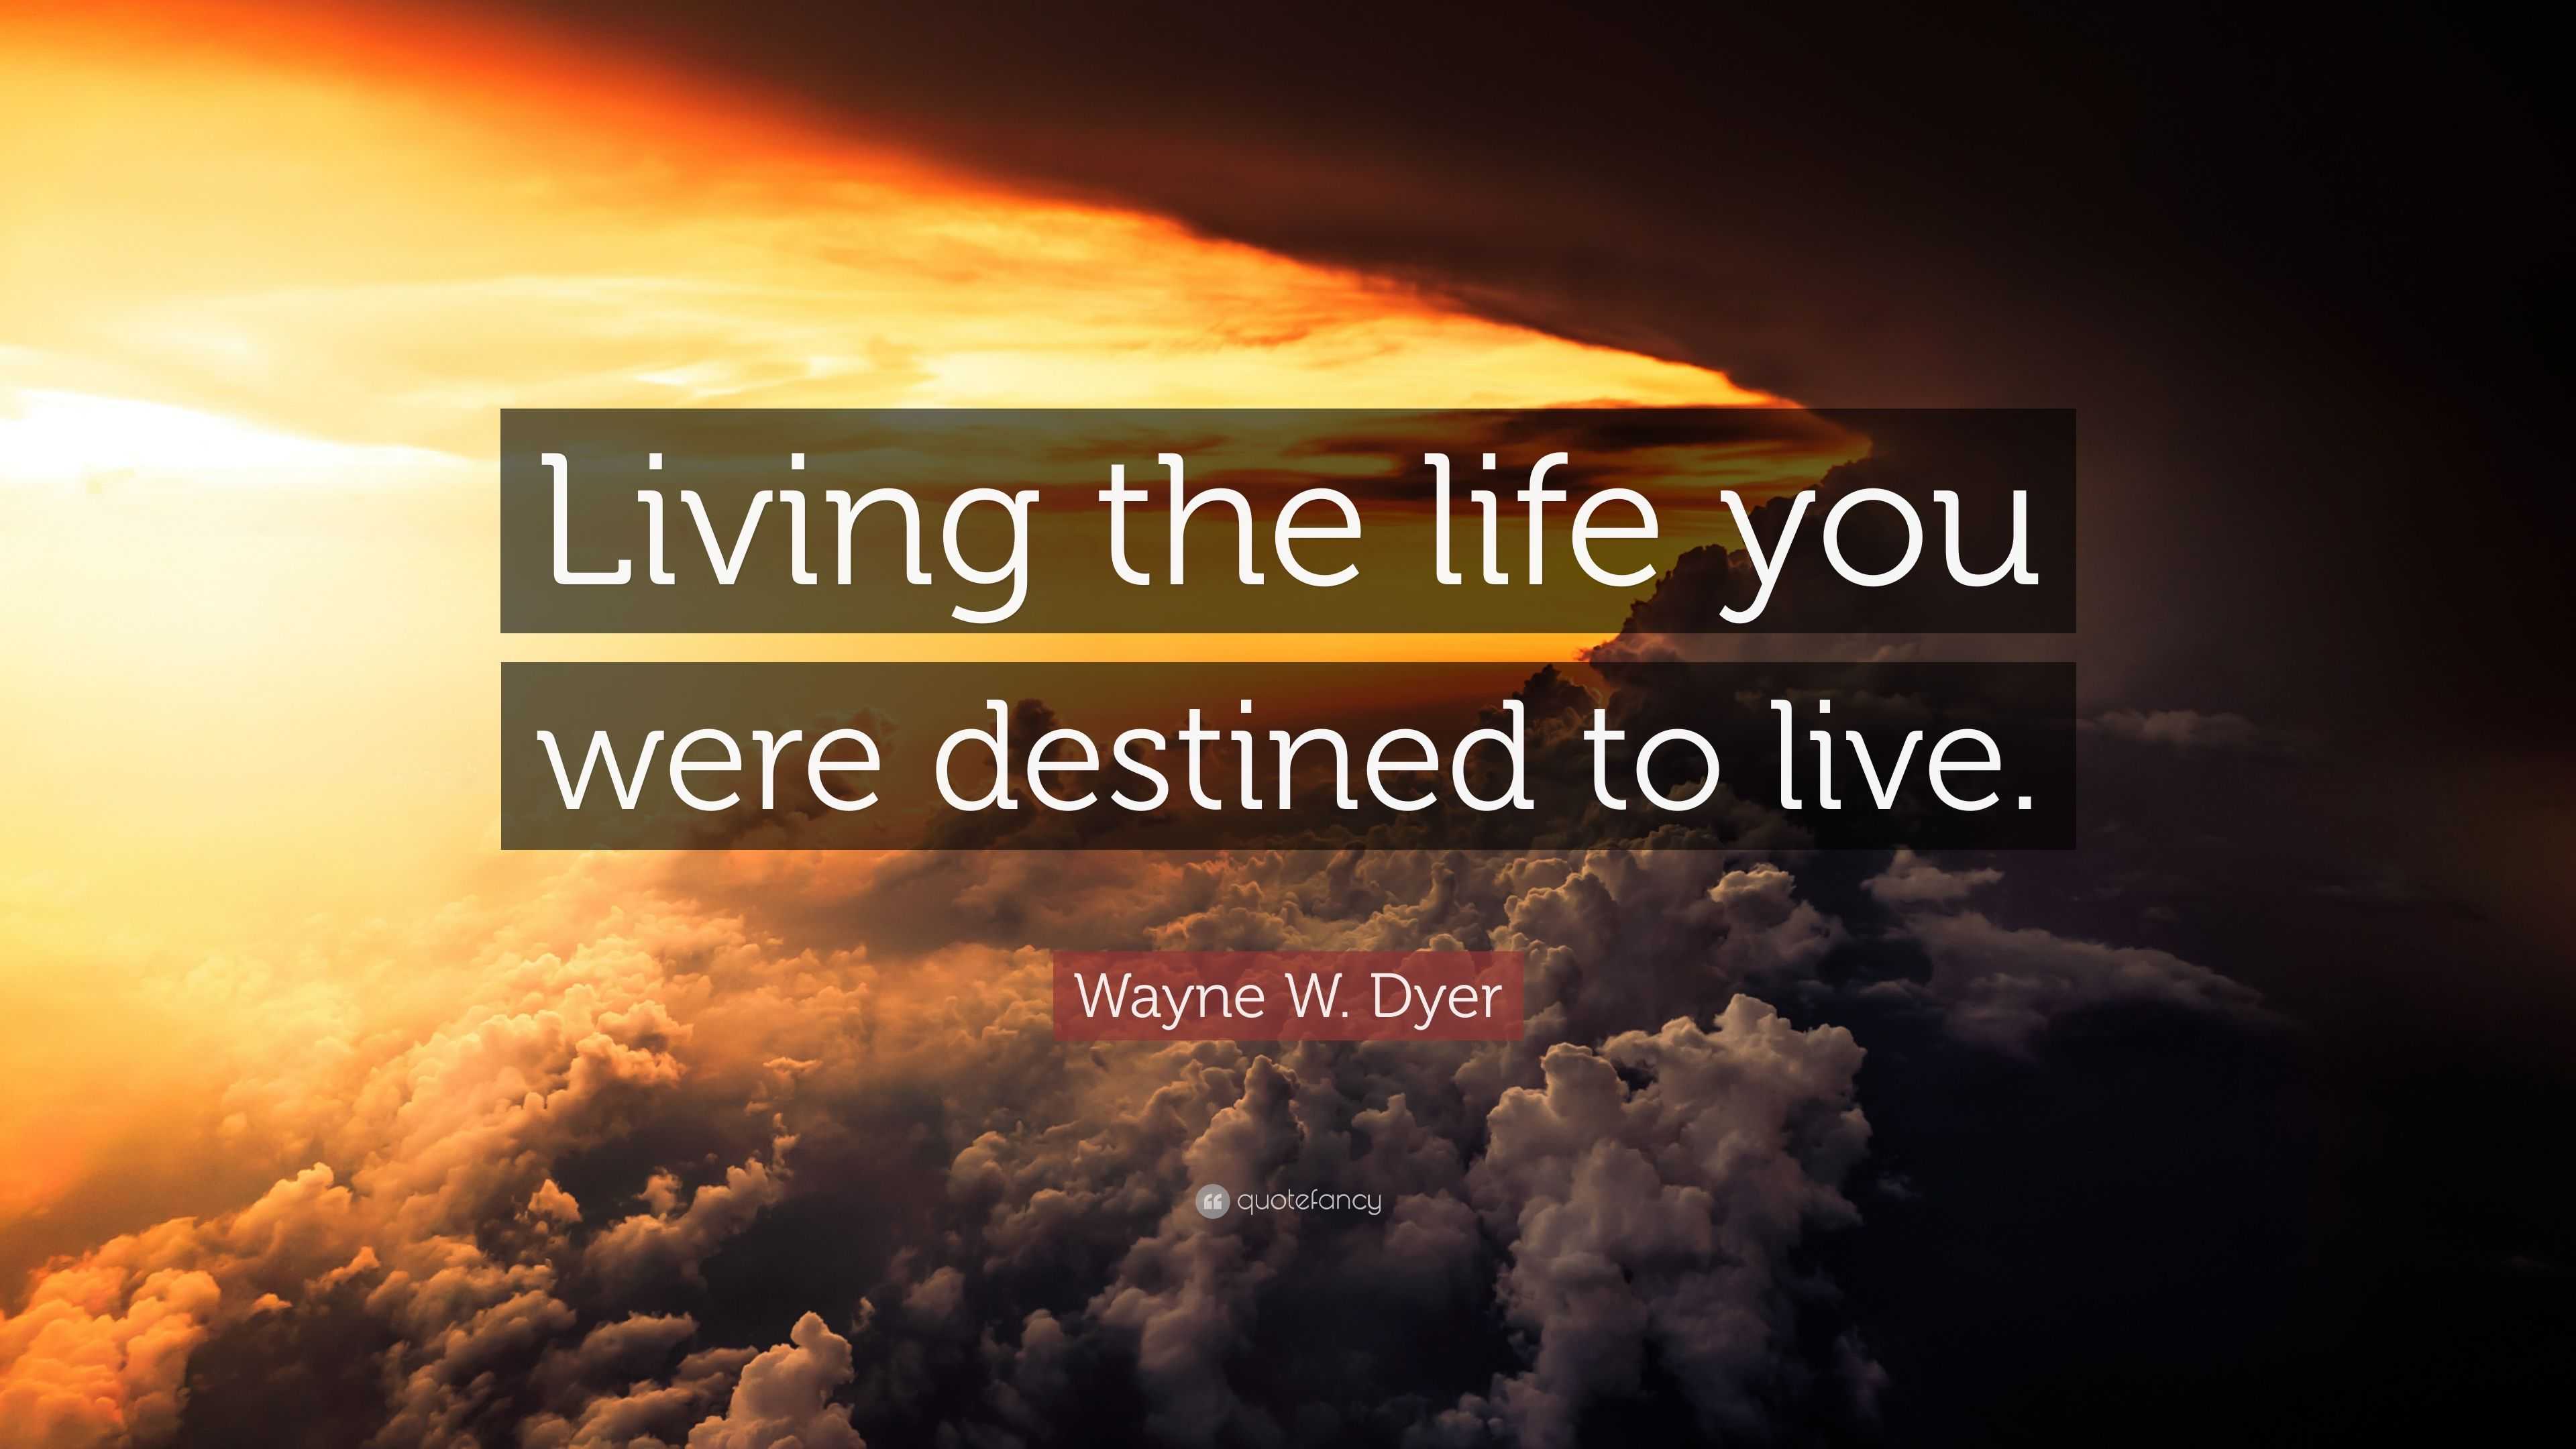 Wayne W. Dyer Quote: “Living the life you were destined to live.”